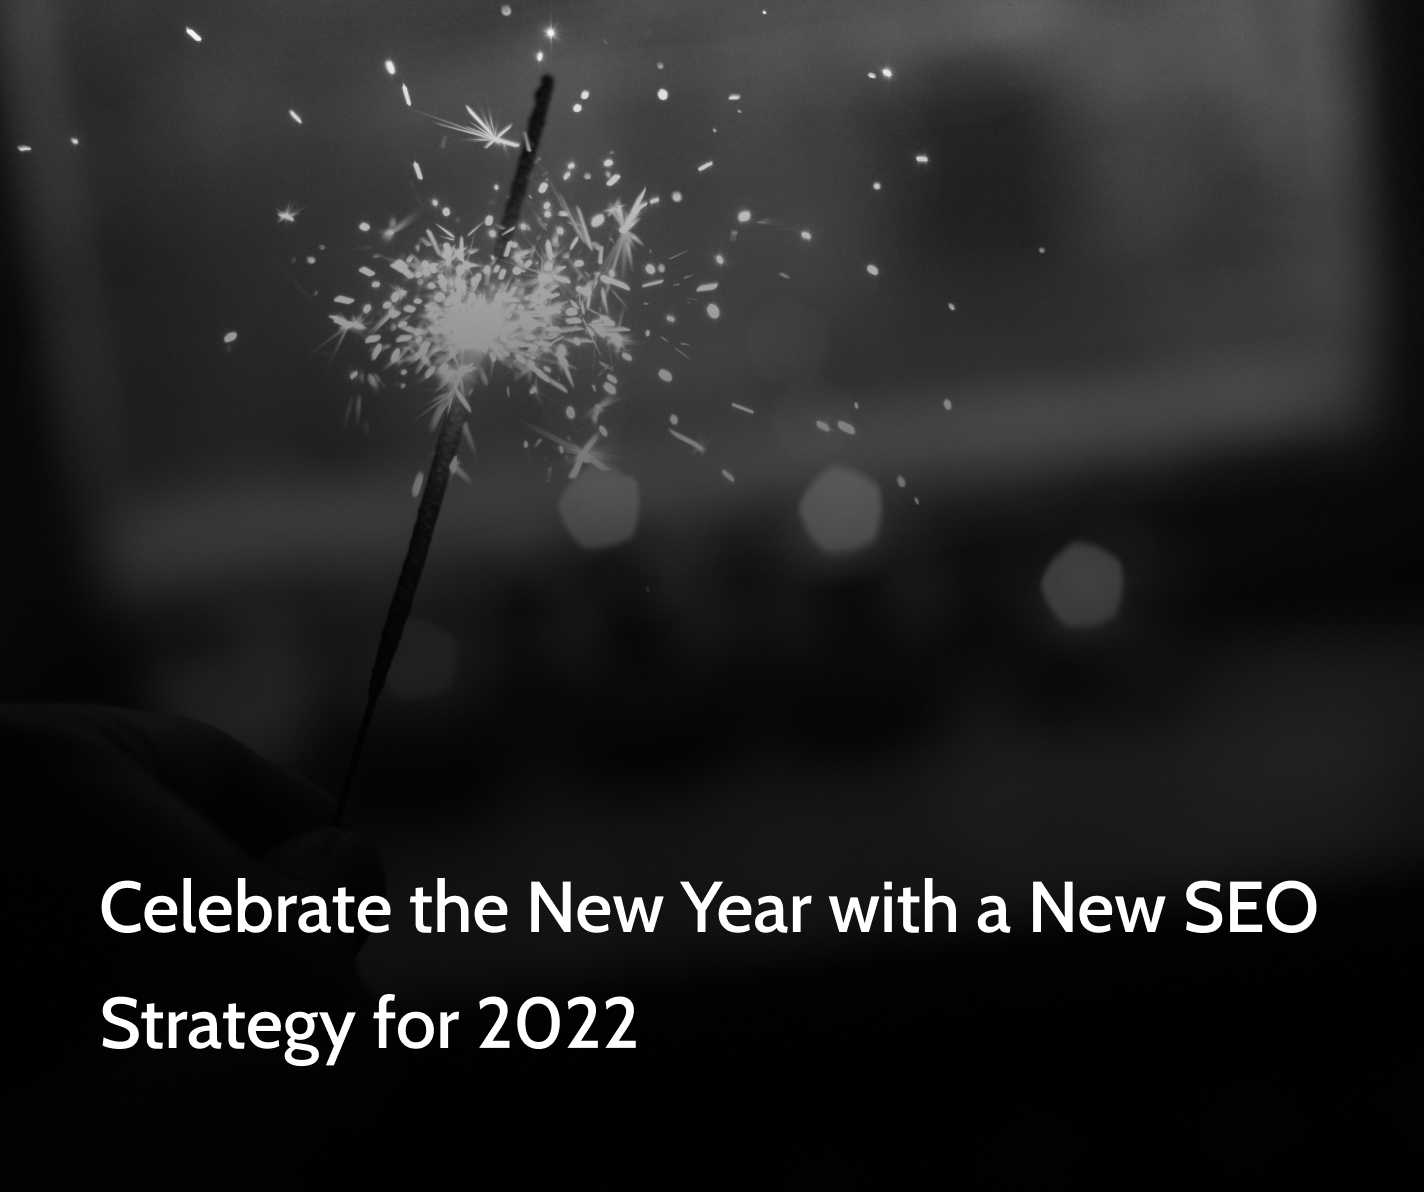 Celebrate the New Year with a New SEO Strategy for 2022 with sparklers in the background